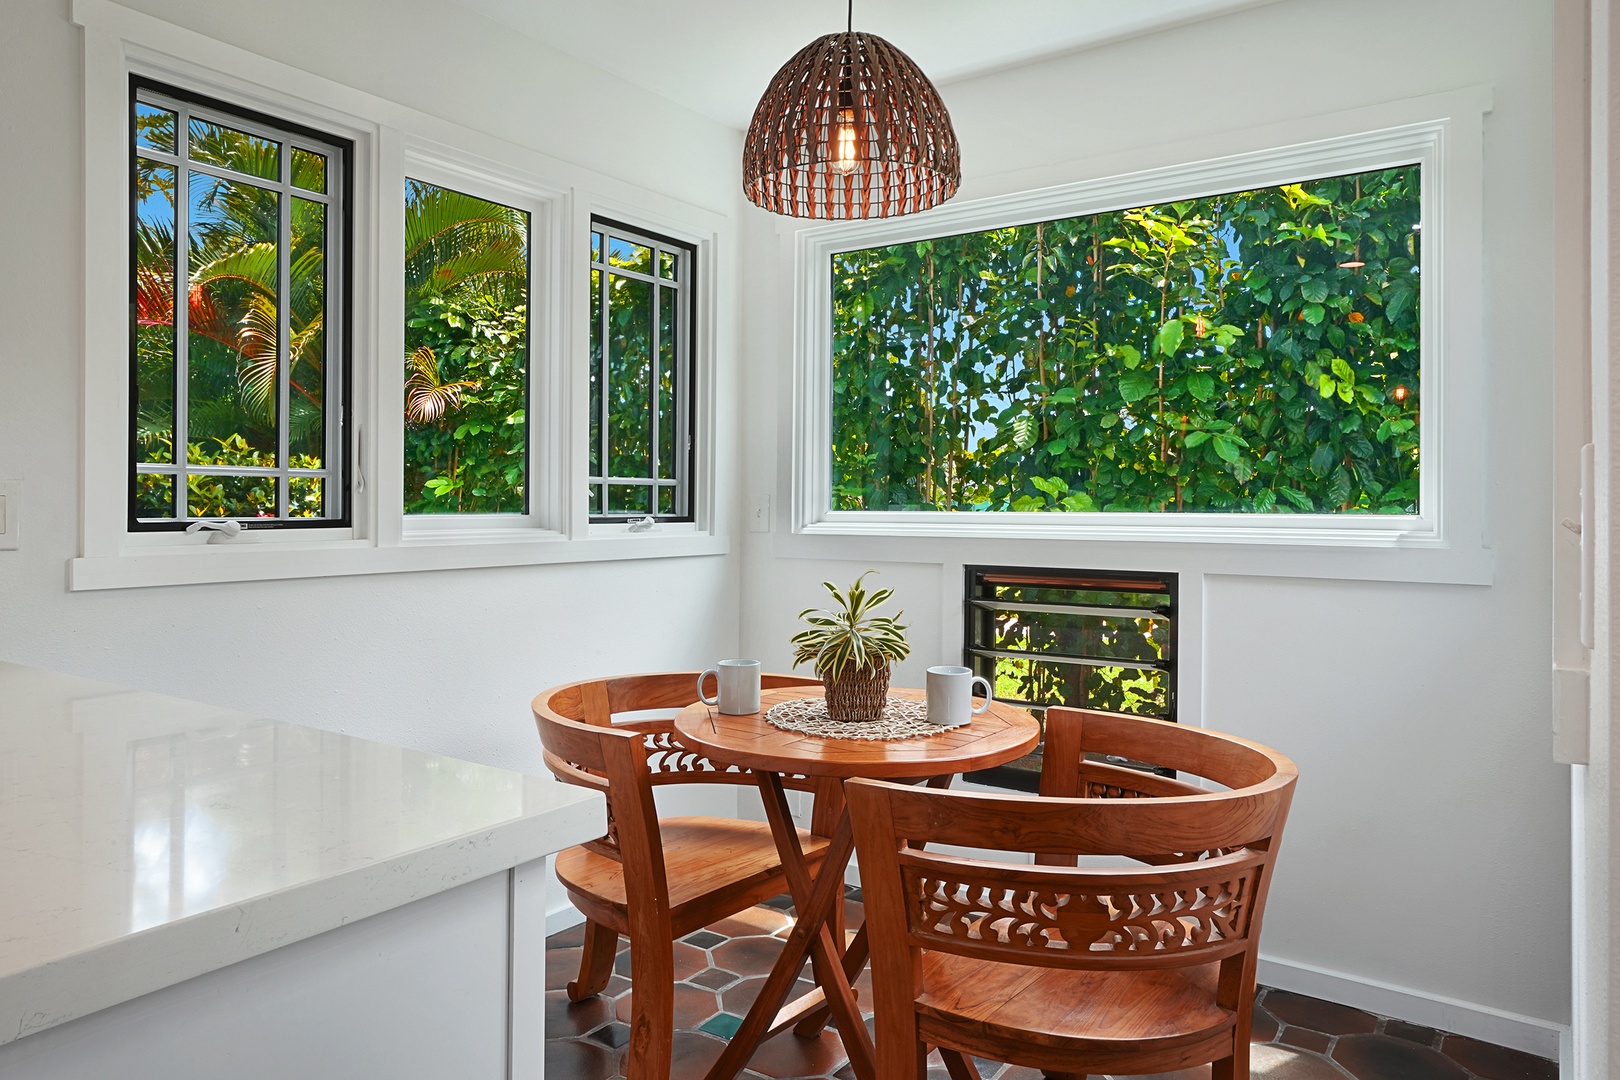 Princeville Vacation Rentals, Kaiana Villa - Breakfast Nook is the cutest spot to enjoy you coffee with island vibes